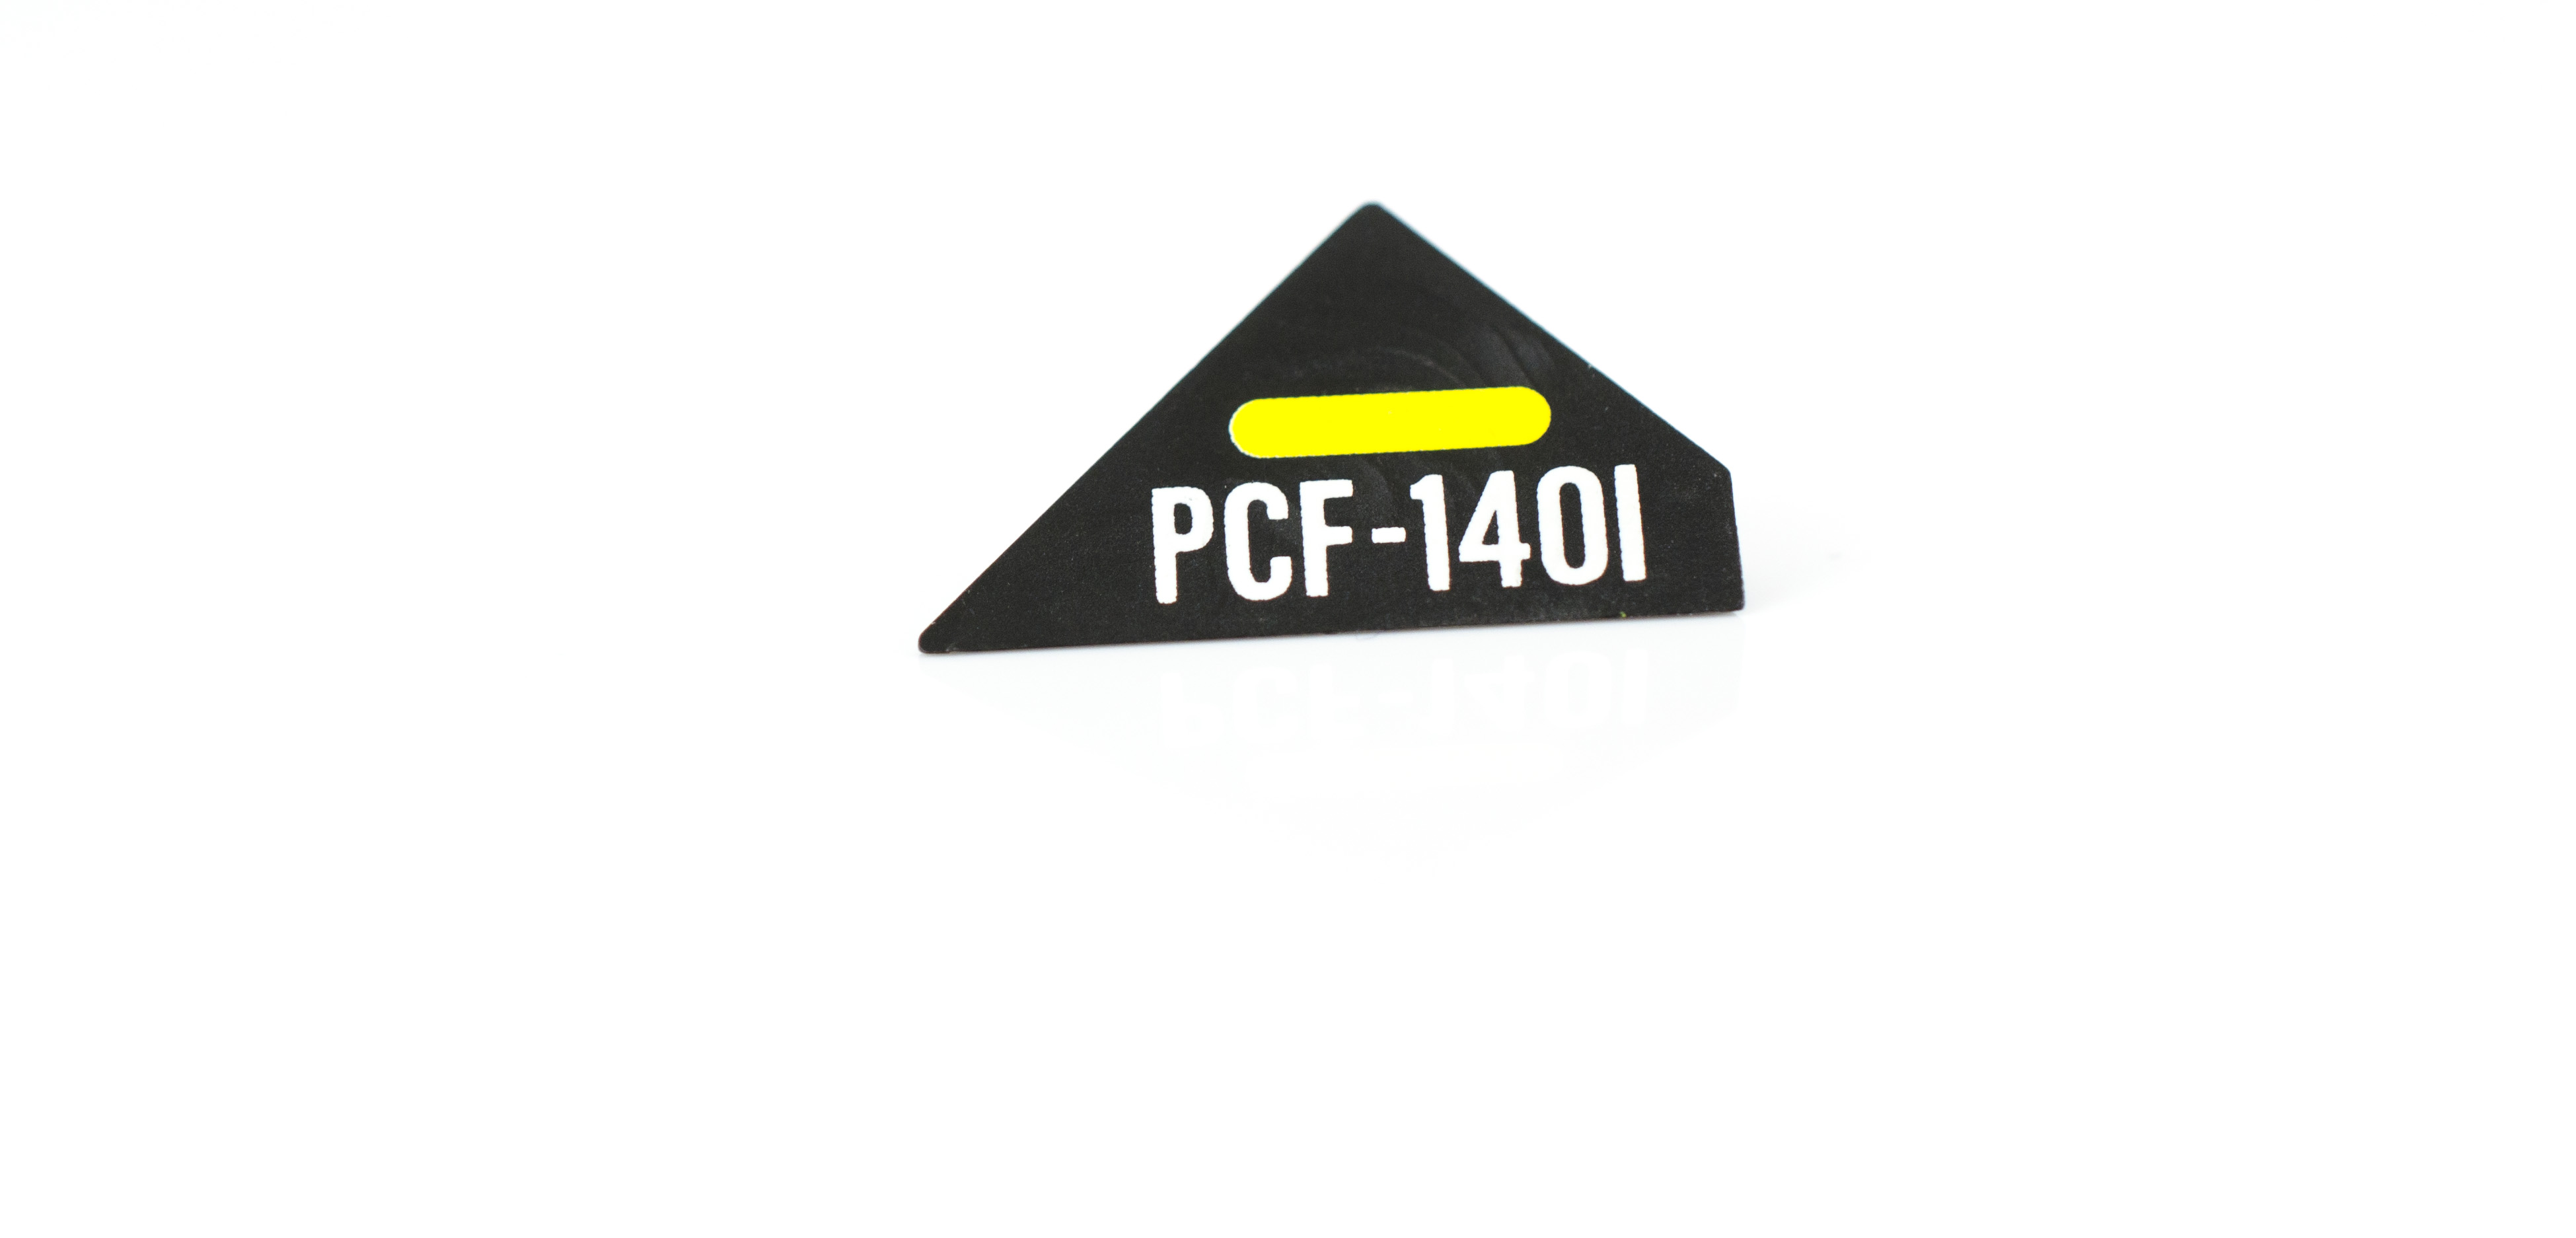 OEM Nameplate: Control Grip - PCF-140I